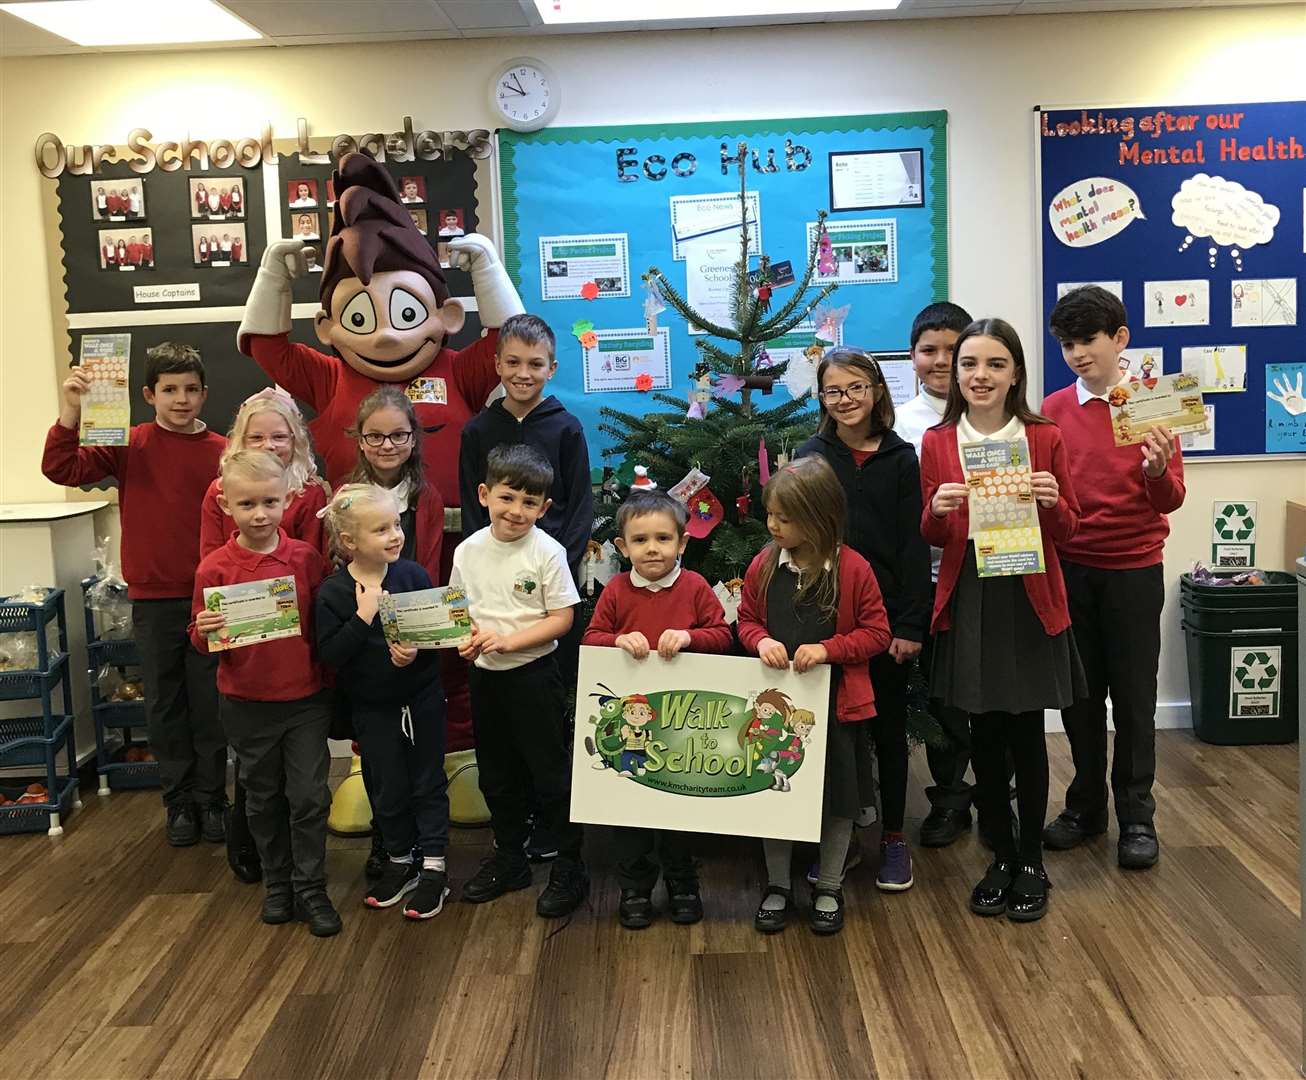 The Walk Once a Week mascot, part of the KM Charity Team programme, visited Miers Court Primary School. Picture: KM Charity Team